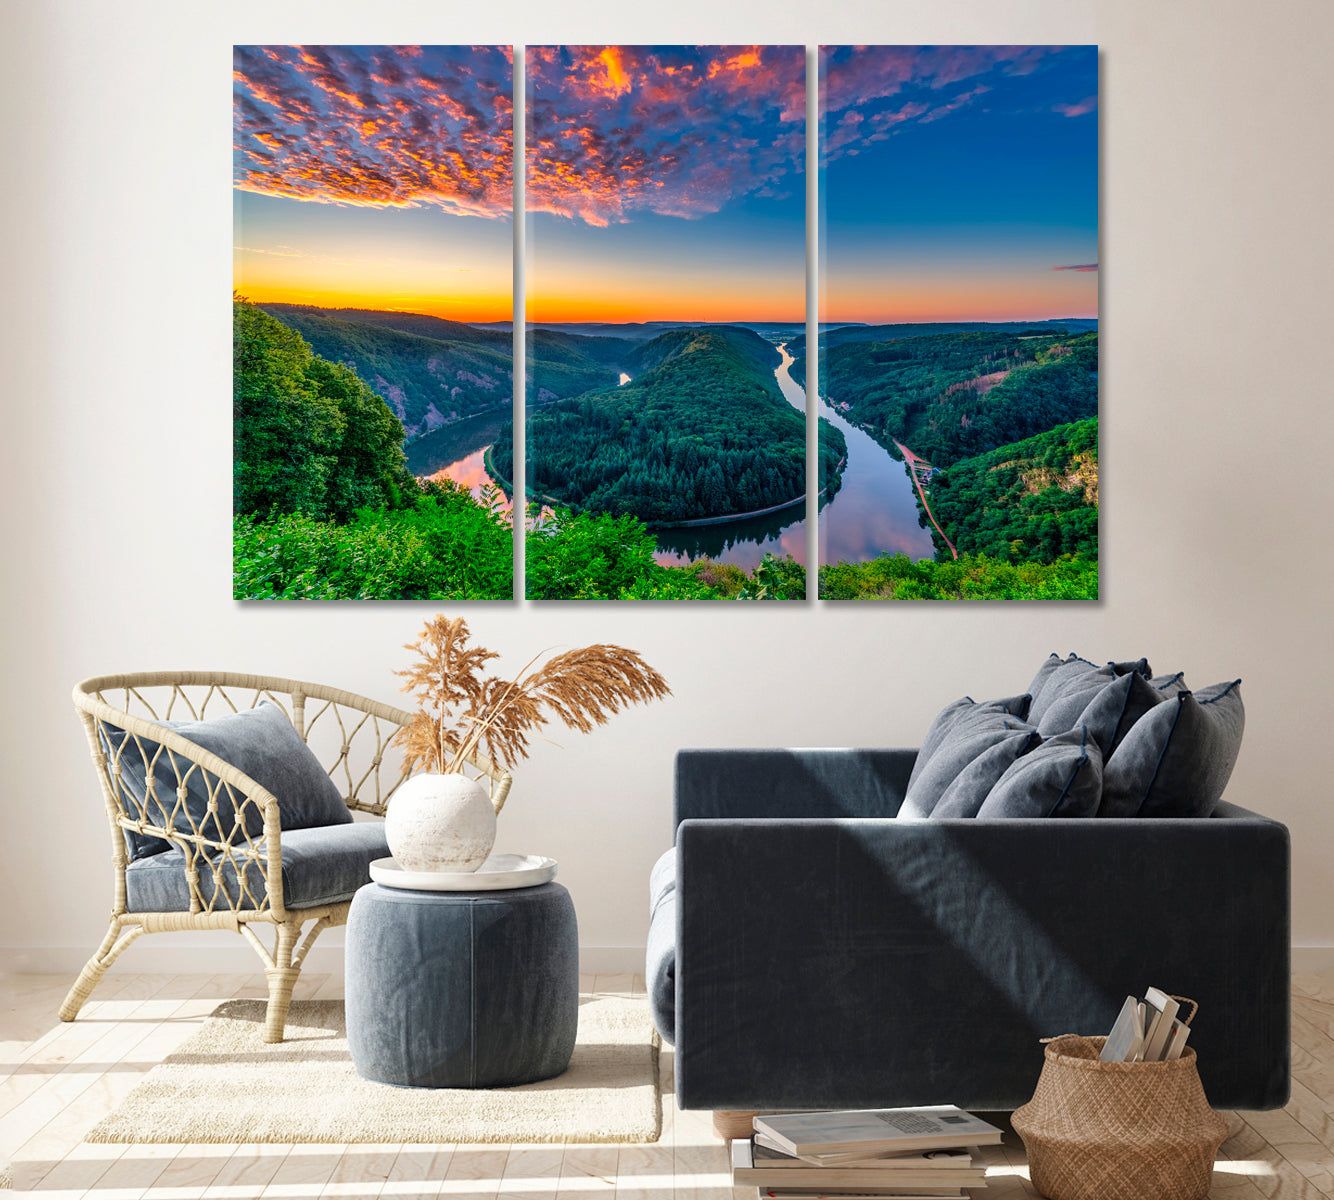 Saar River Valley South Germany Canvas Print ArtLexy 3 Panels 36"x24" inches 